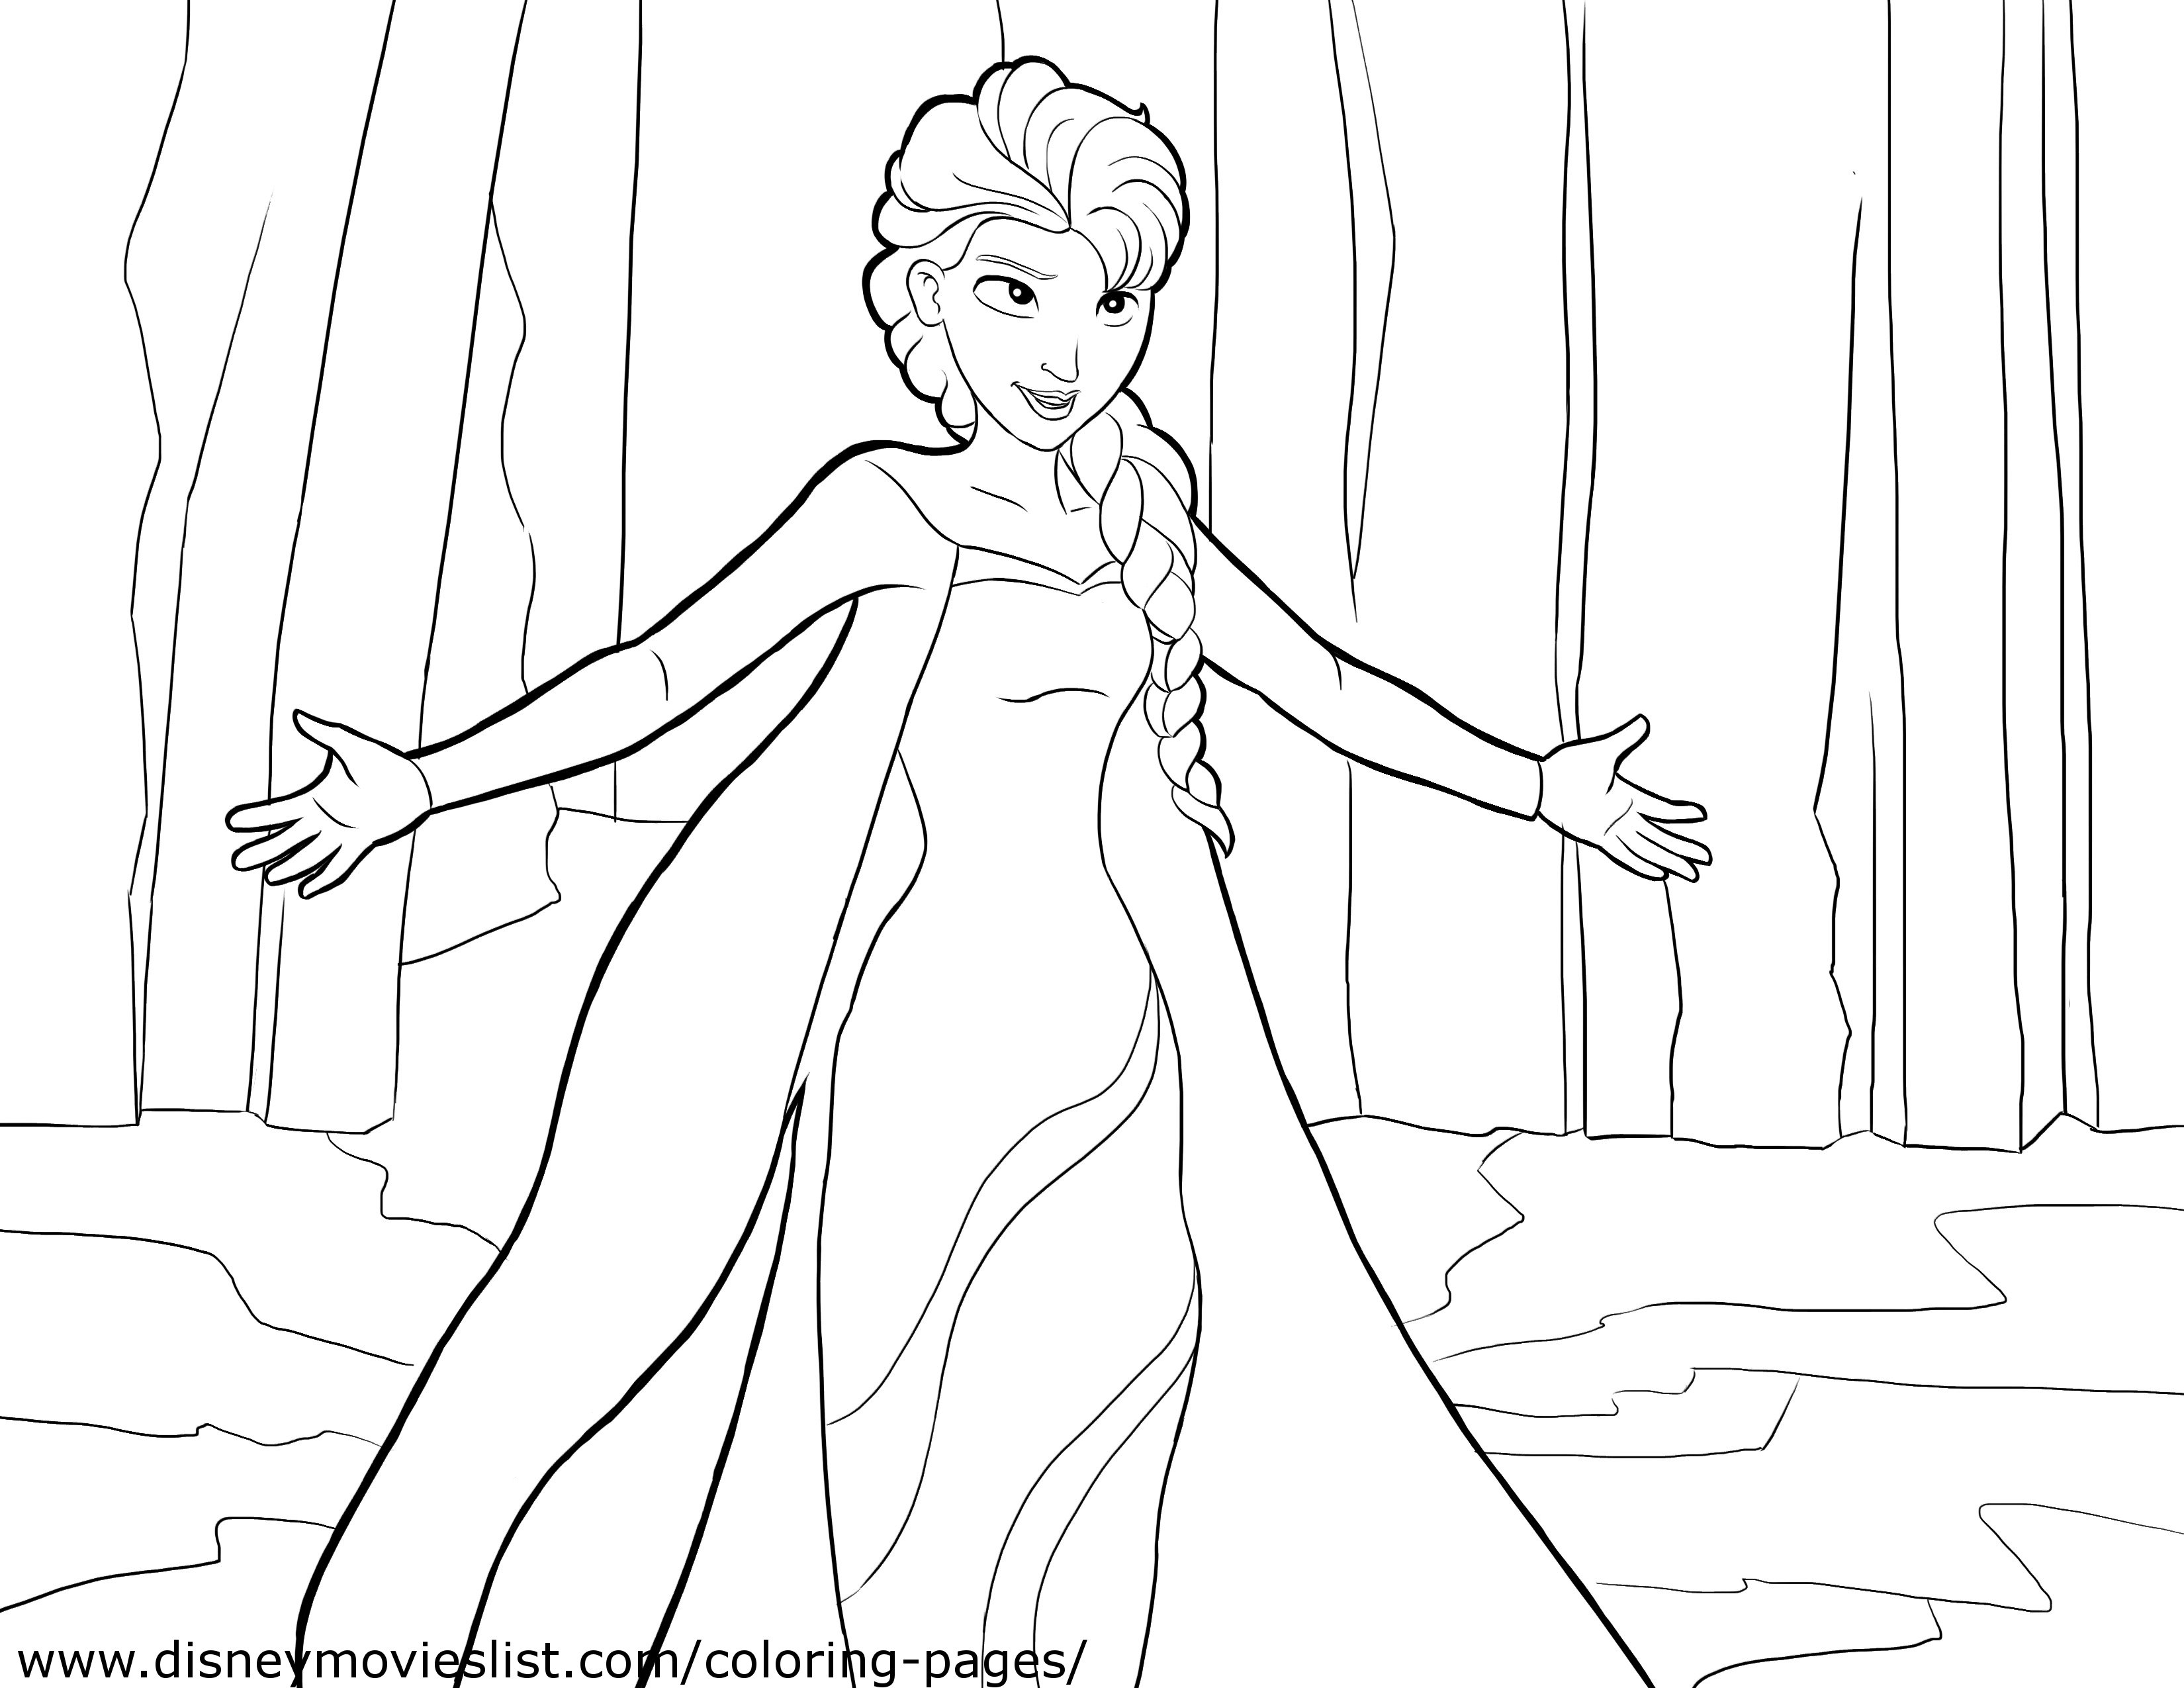 Download Disney FROZEN Coloring Pages - Lovebugs and Postcards